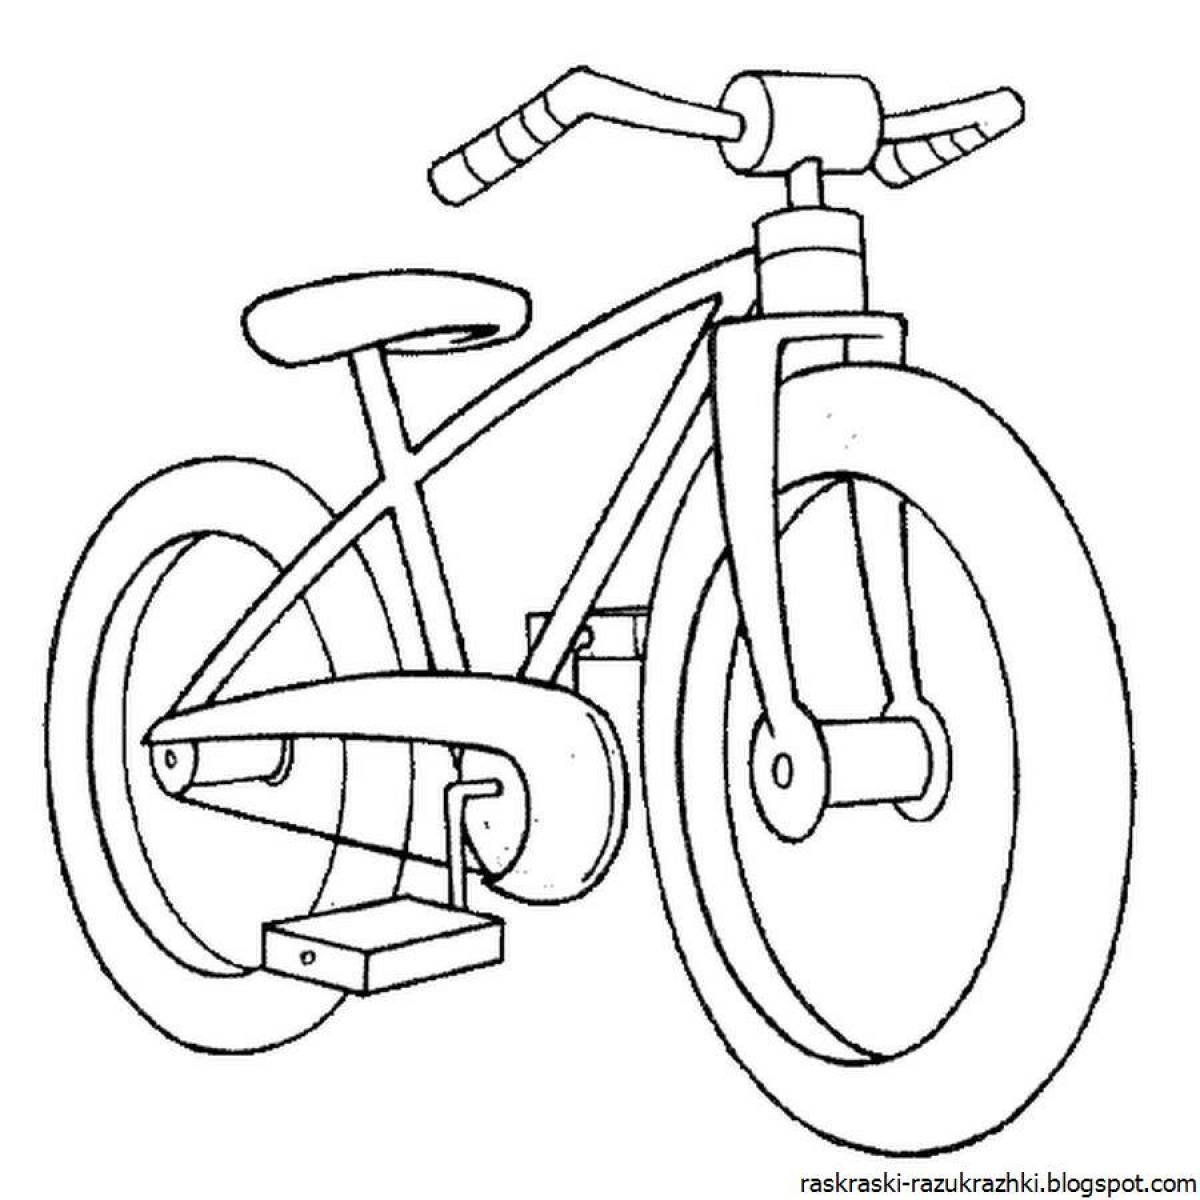 Colorific transport coloring page for ages 5-6